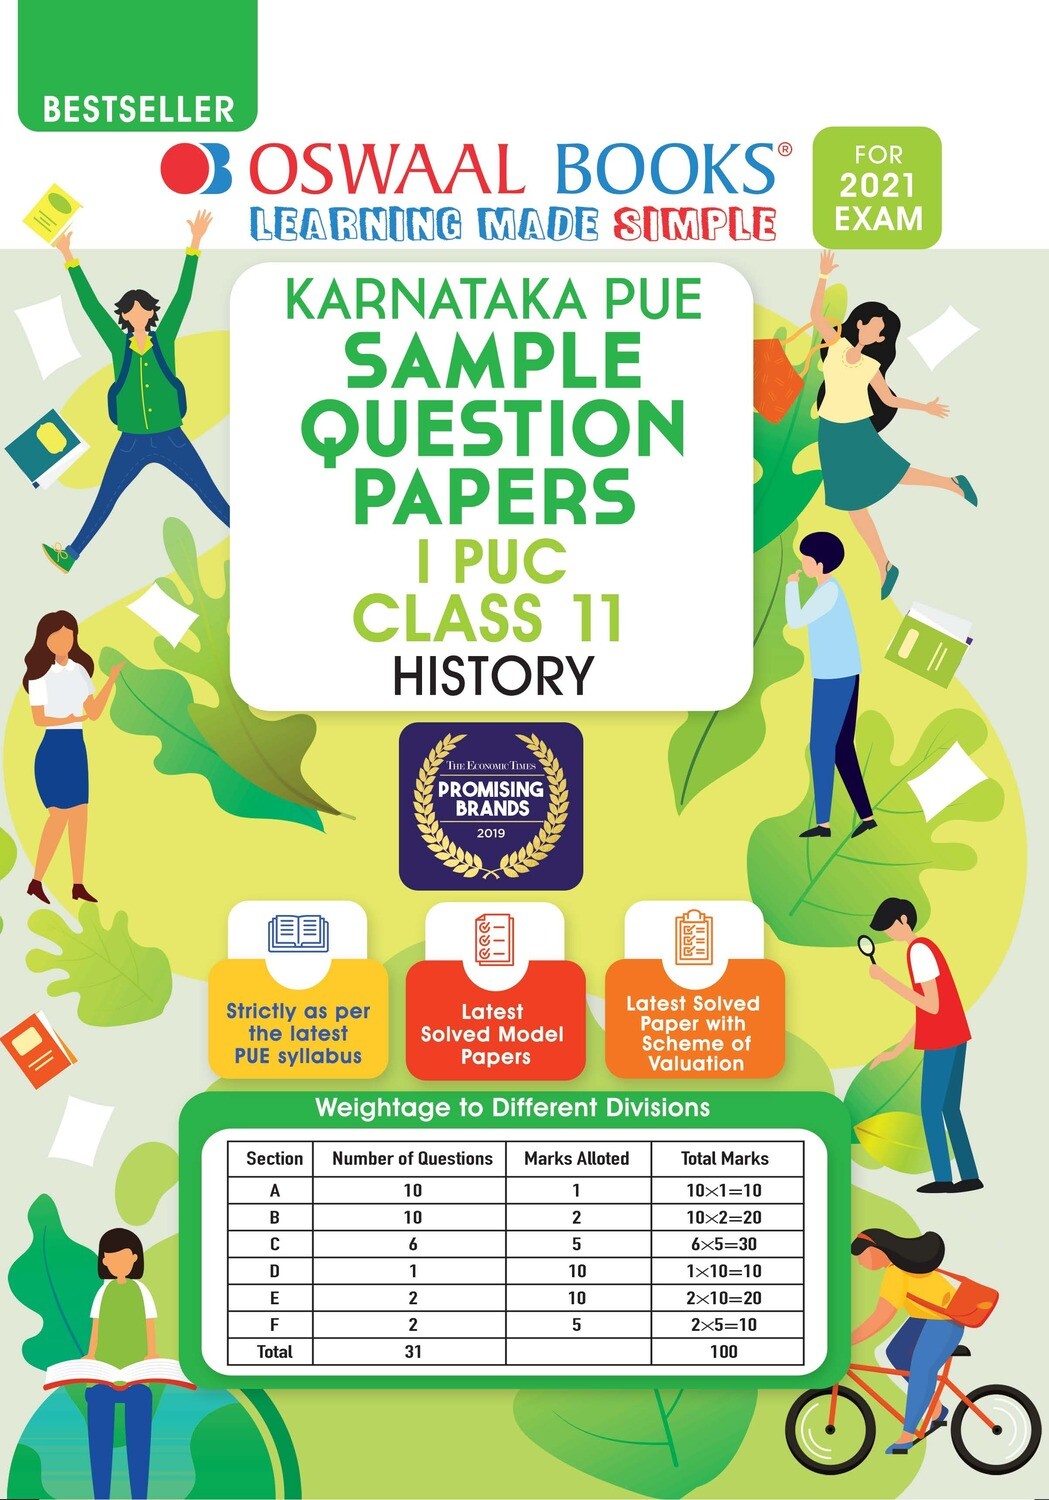 Buy e-book: Oswaal Karnataka PUE Sample Question Papers I PUC Class 11 History (For 2021 Exam): 9789390411238